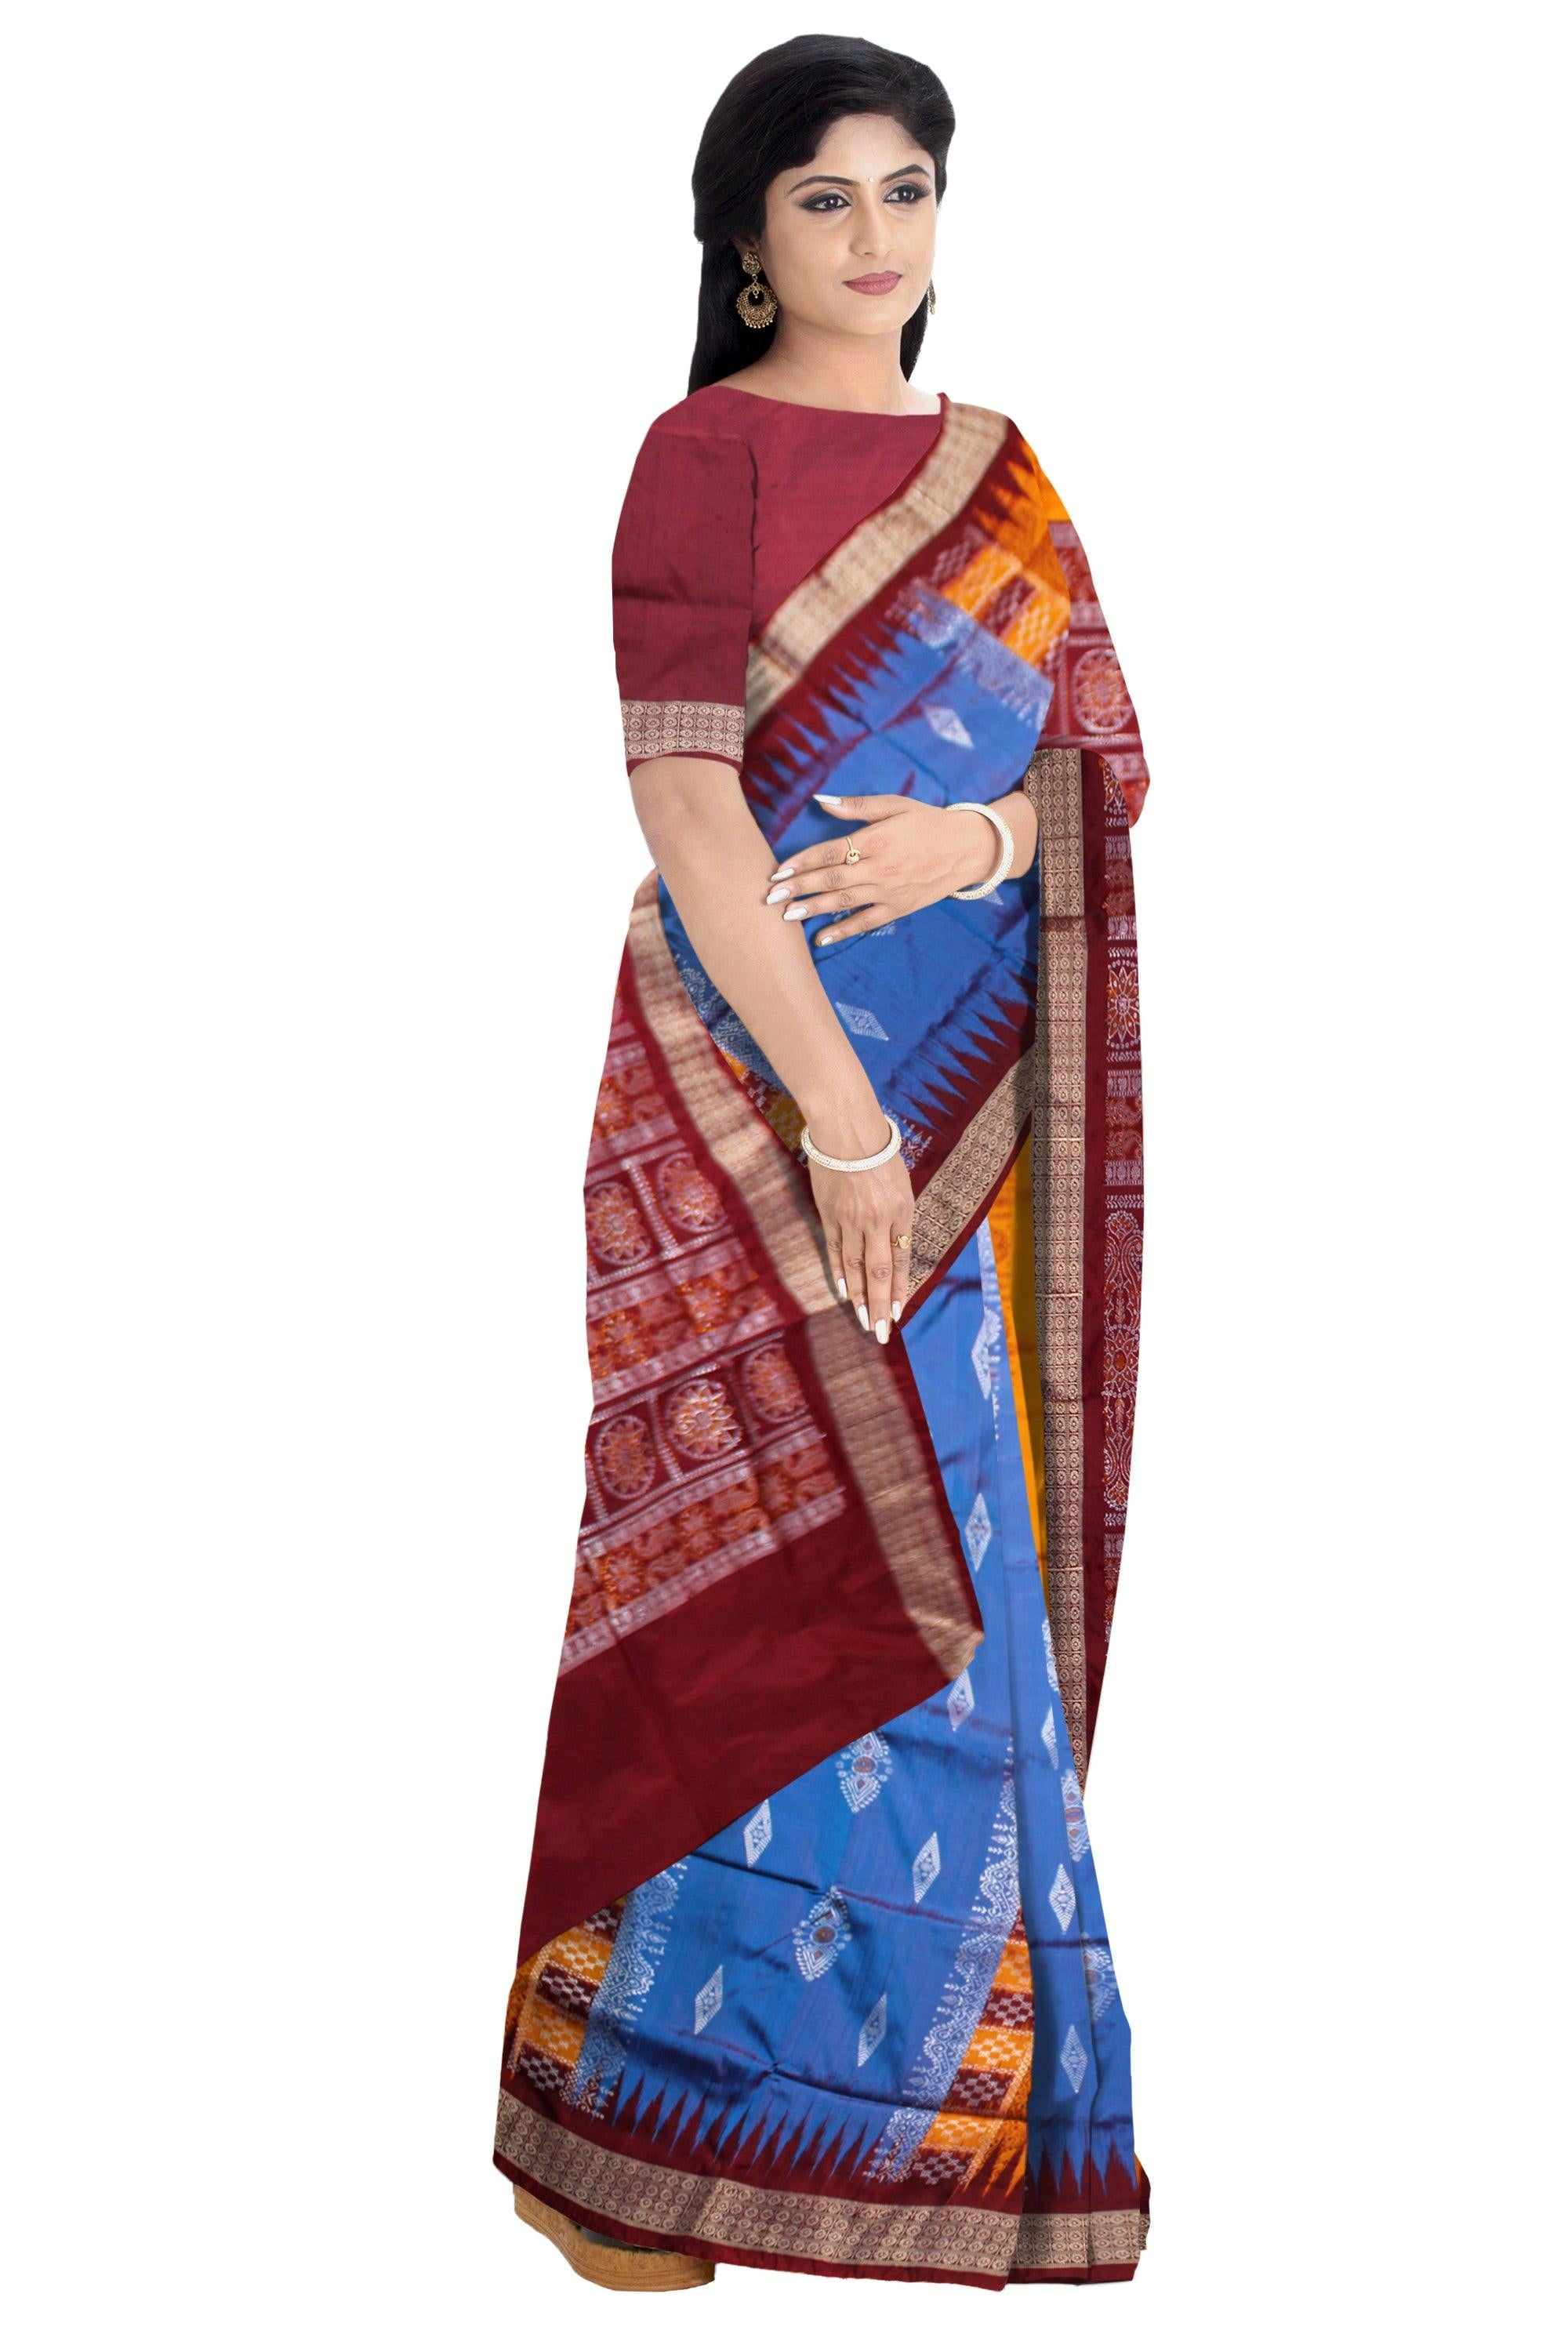 BOMKEI PATA SAREE IN YELLOW, SKY AND MAROON COLOR BASE, AVAILABLE WITH BLOUSE PIECE. - Koshali Arts & Crafts Enterprise